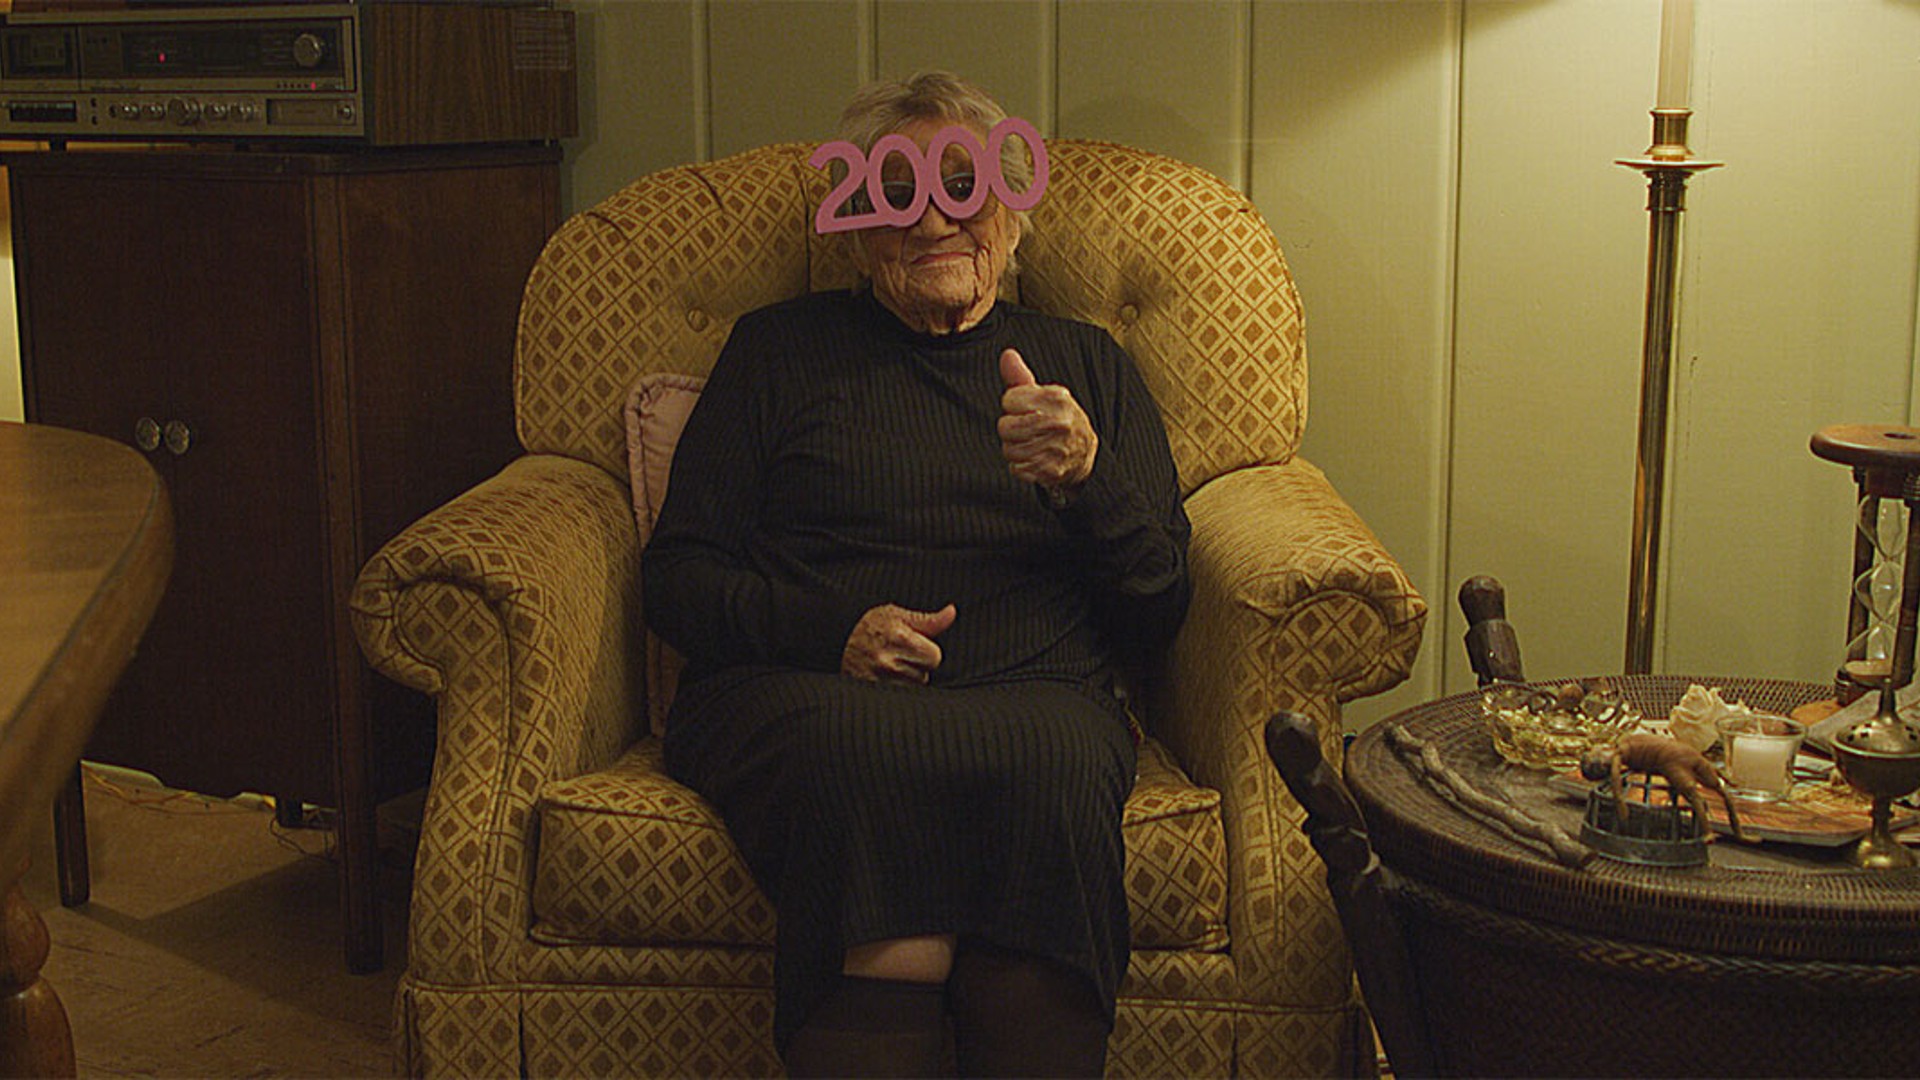 An elderly party guest awaits Y2K.